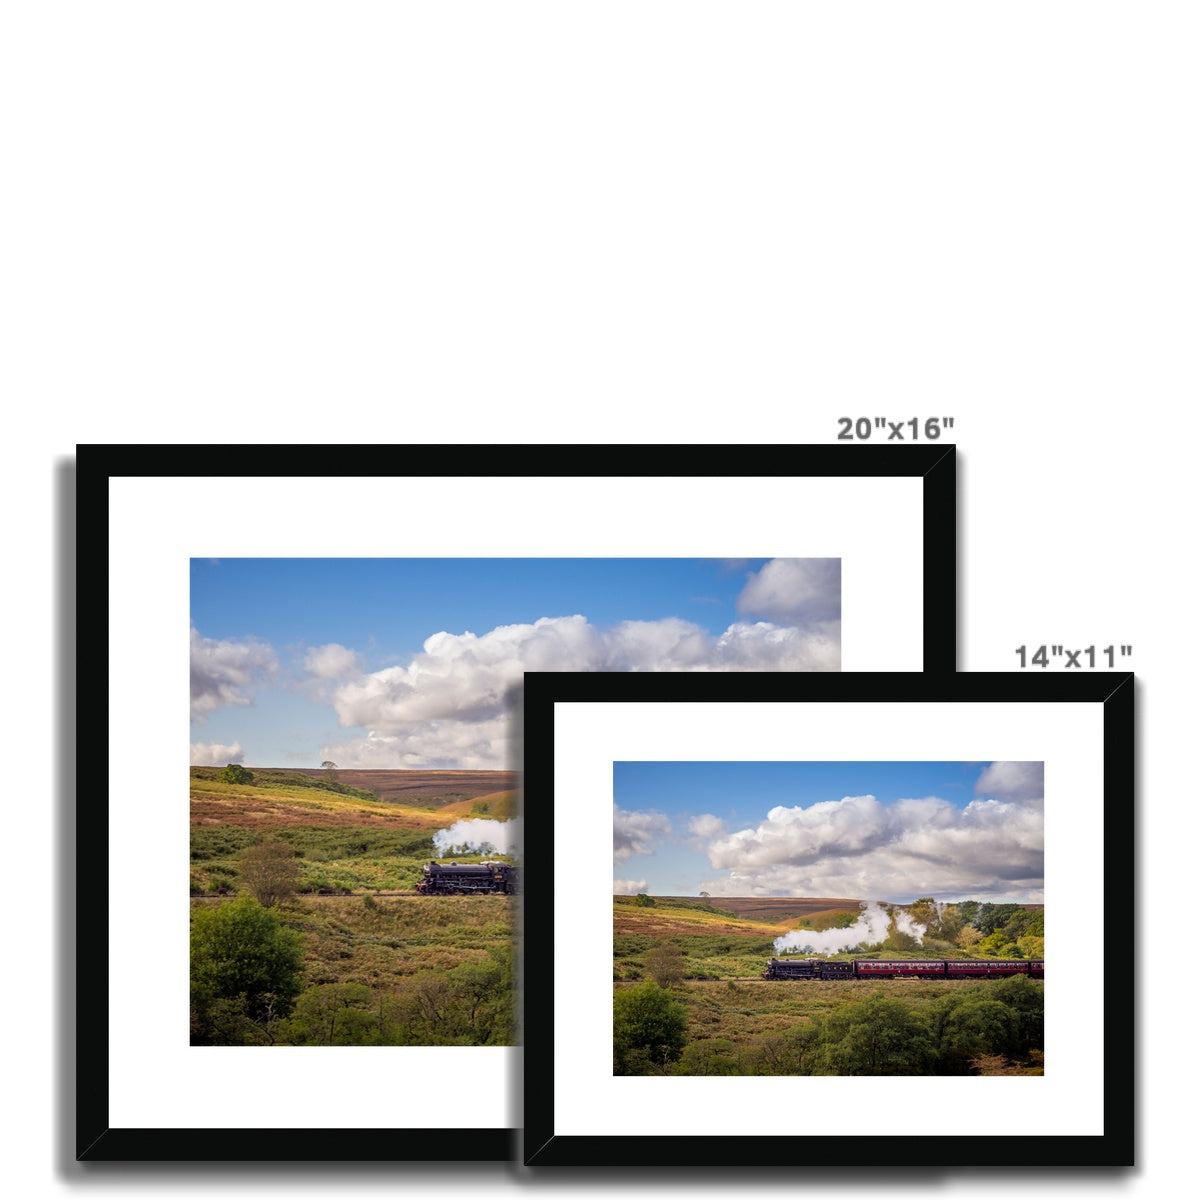 Steam Train: LNER Thompson Class B1 No. 1264  on the North Yorkshire Moors in summer. UK Framed & Mounted Print